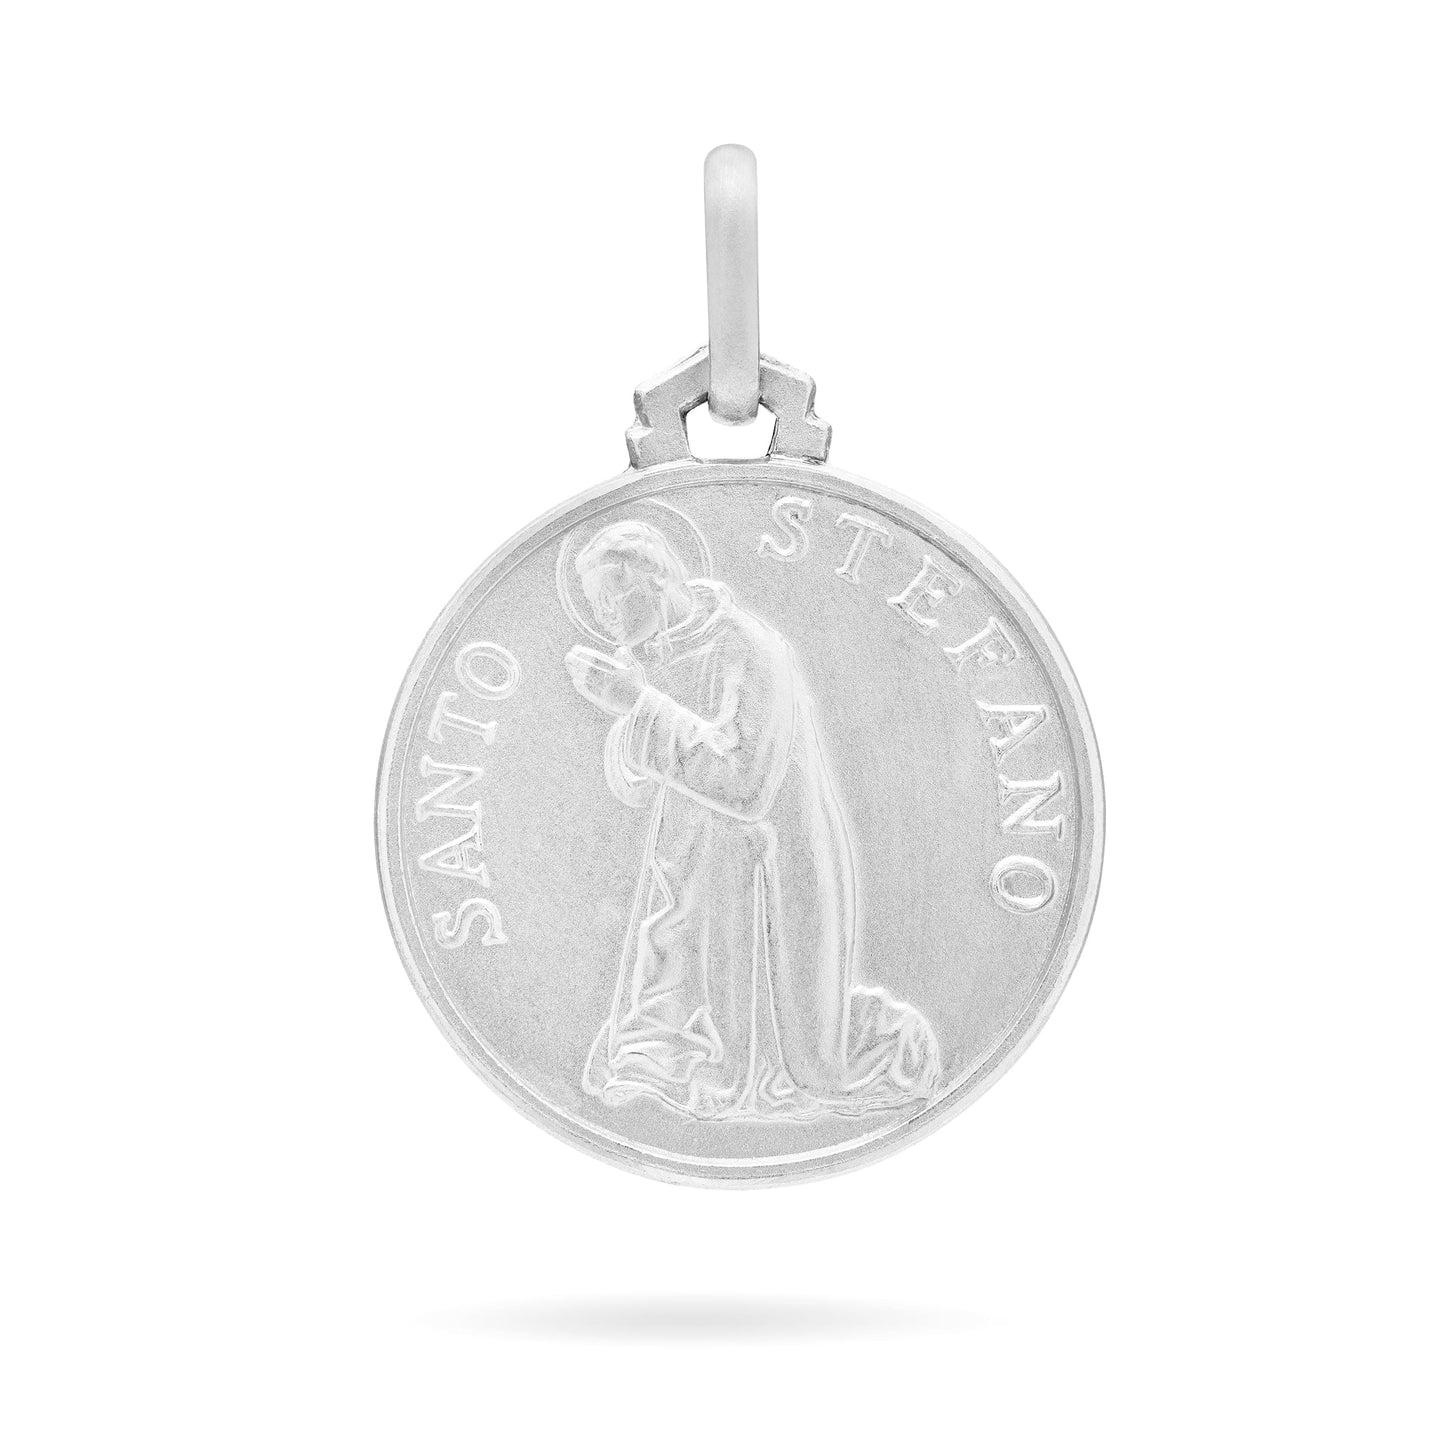 MONDO CATTOLICO Medal 18 mm (0.70 in) Silver medal of Saint Stephen